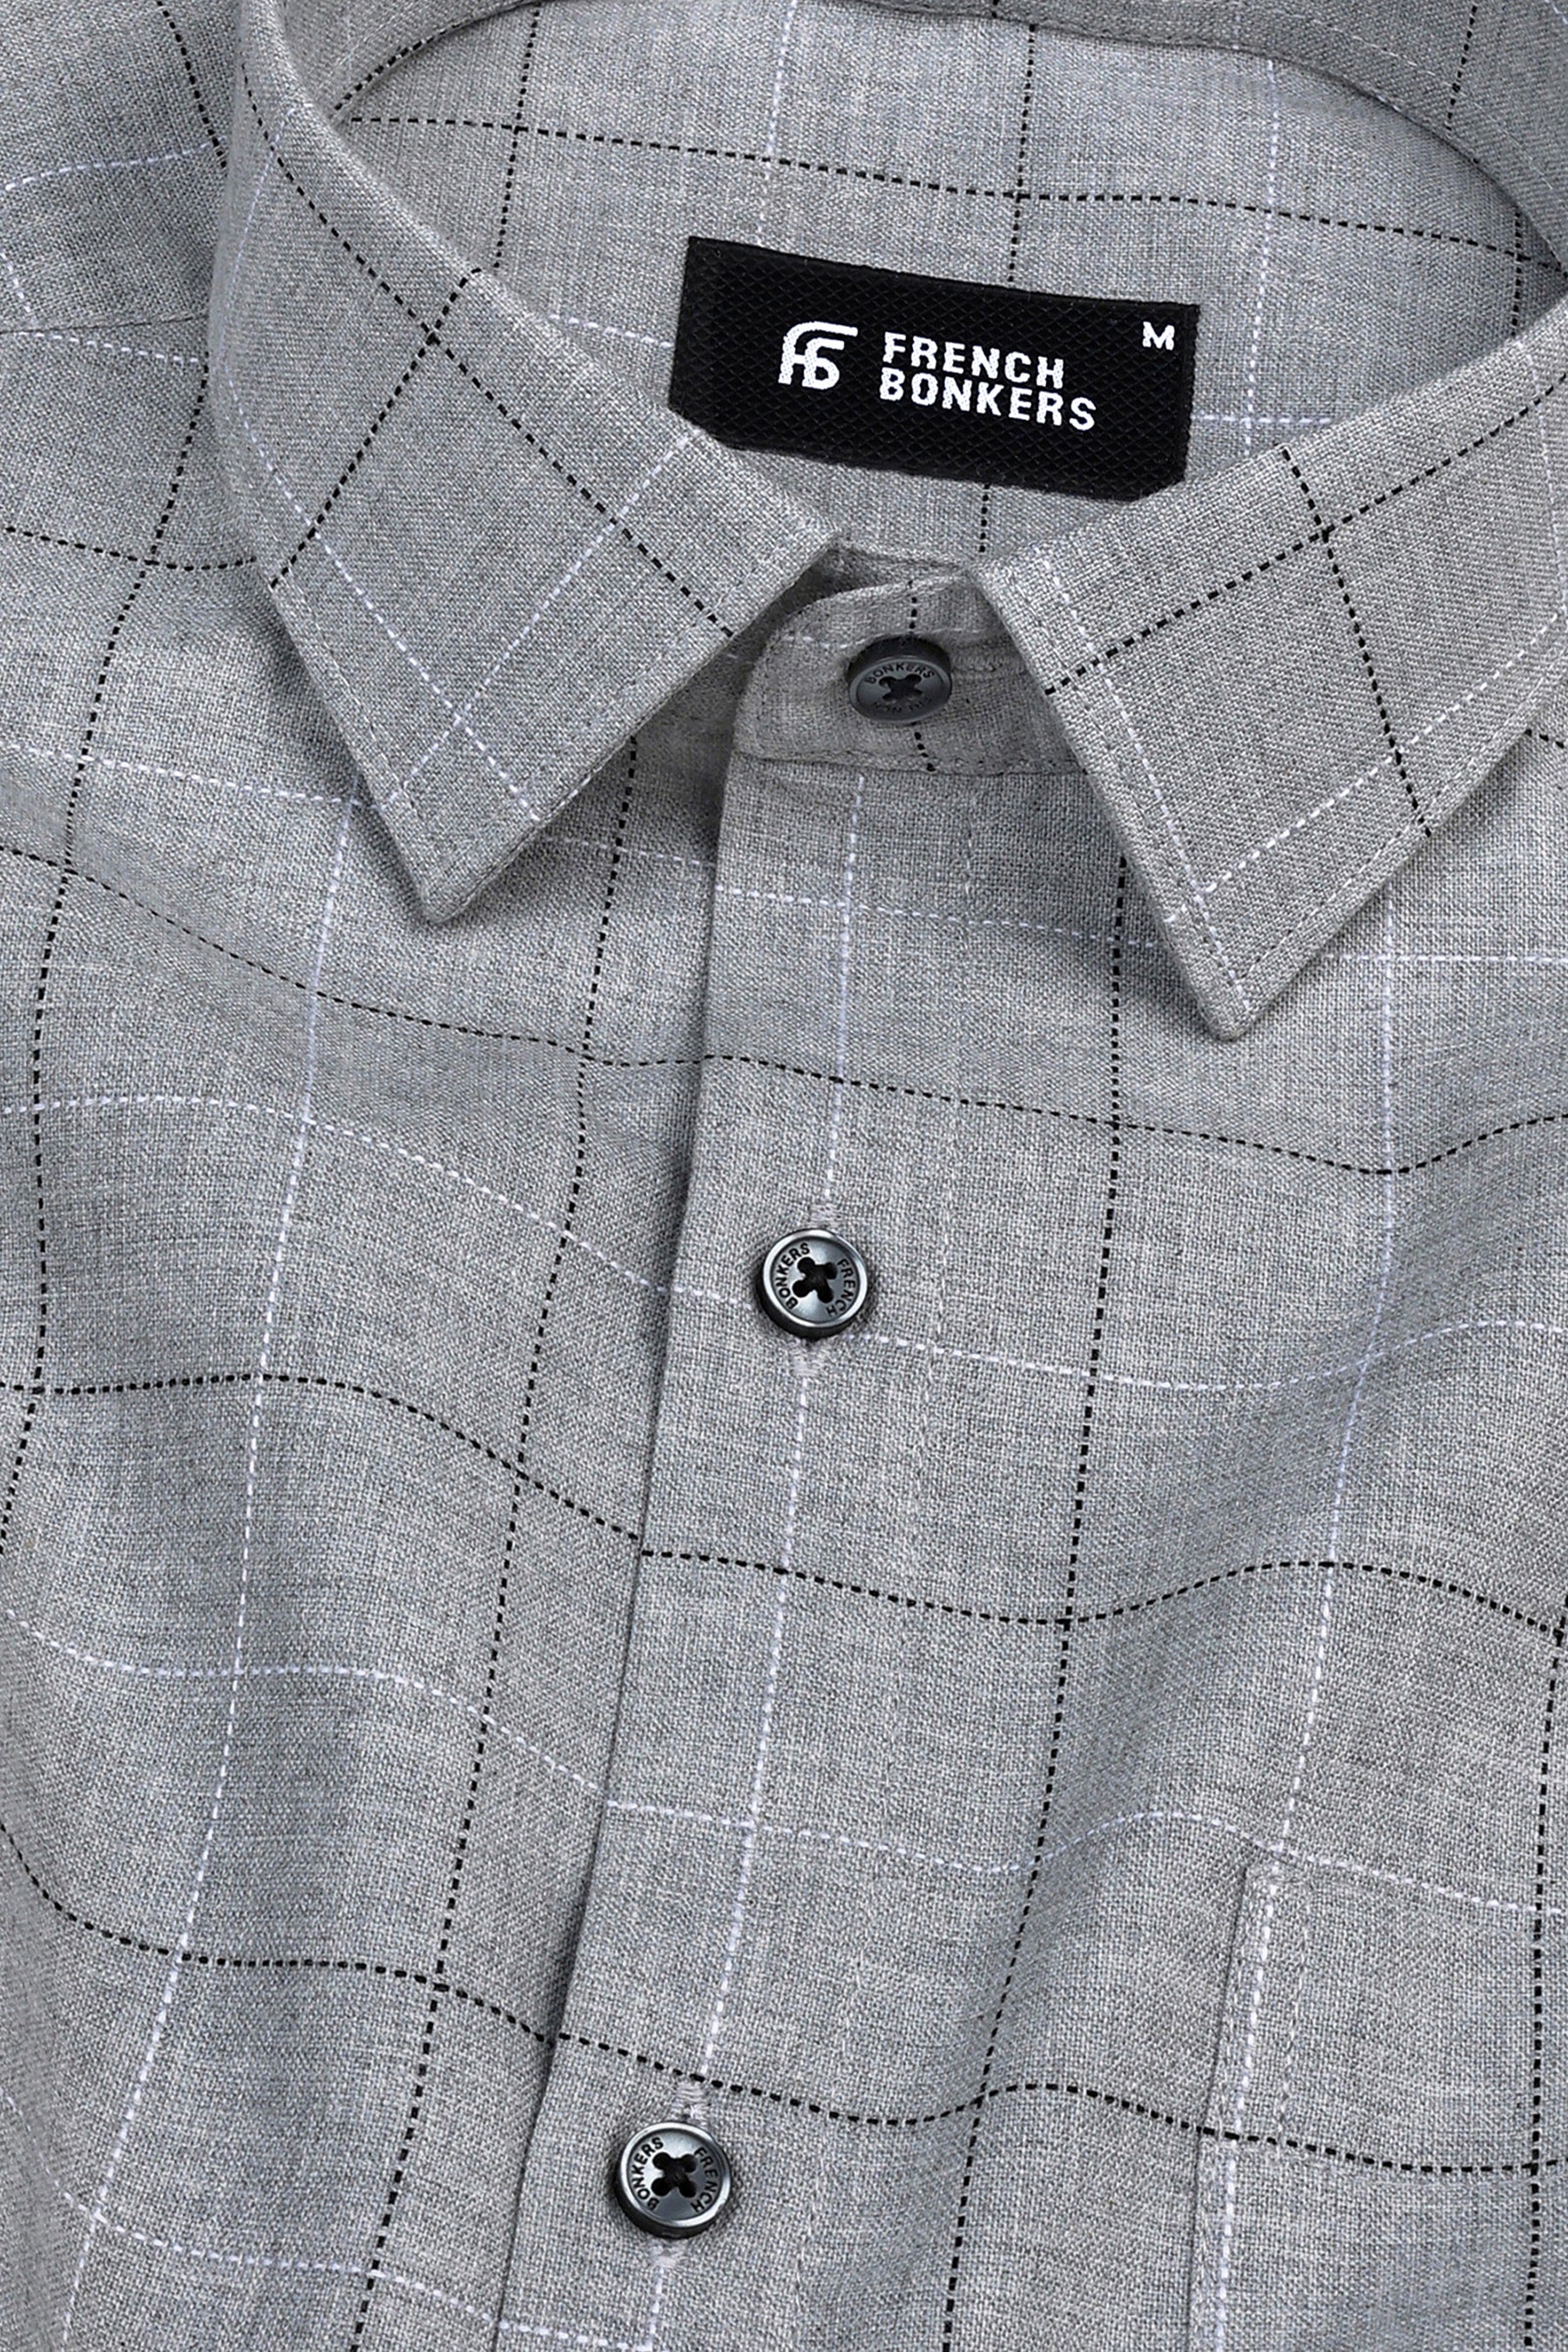 Cement grey with black and white argyle check shirt